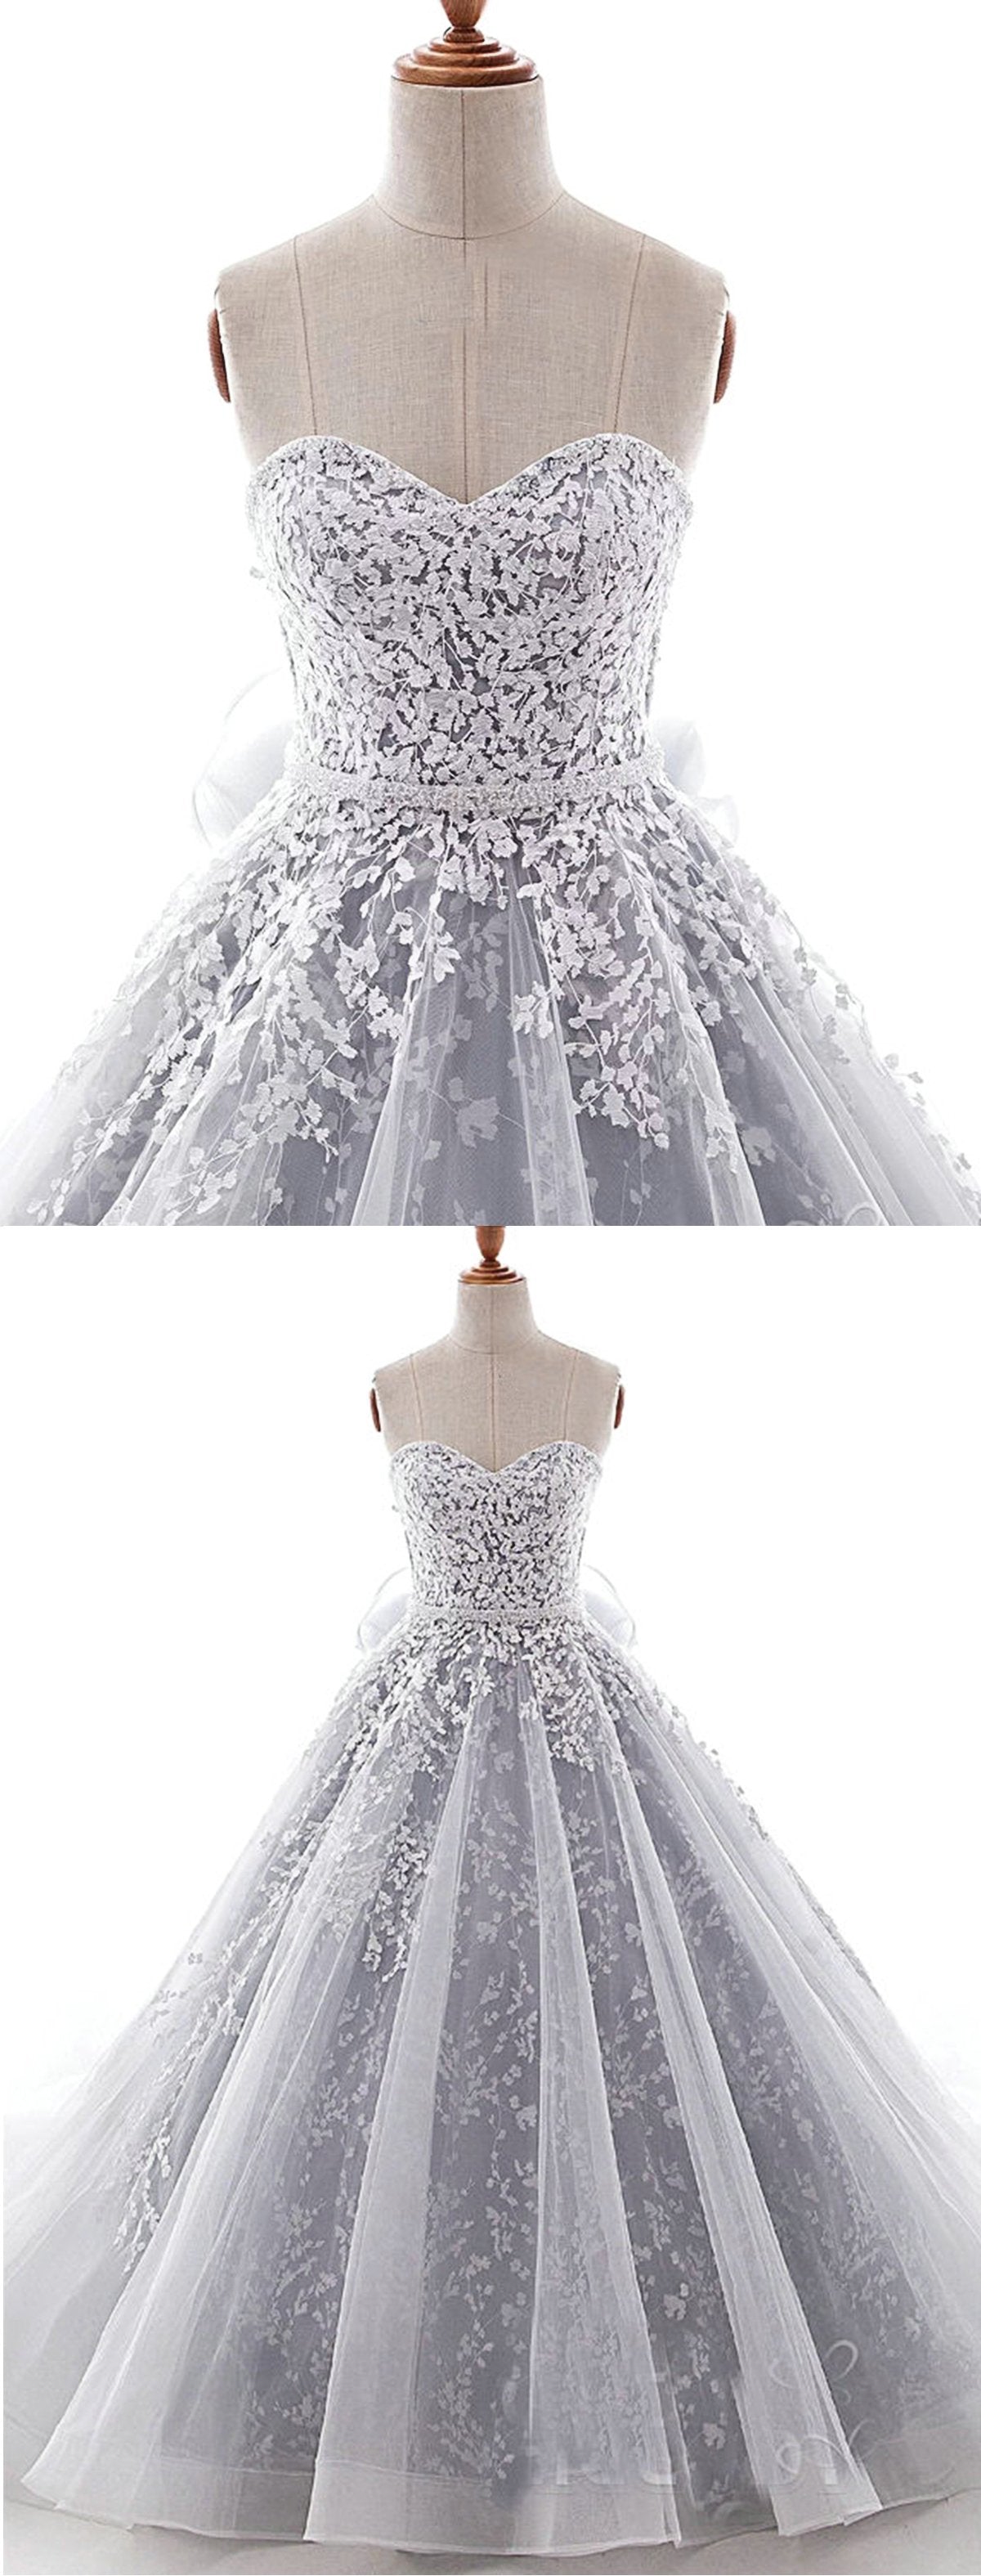 Sweetheart Neck Gray Organza Lace Applique Long Formal Prom Dress, Evening Dress CD16799